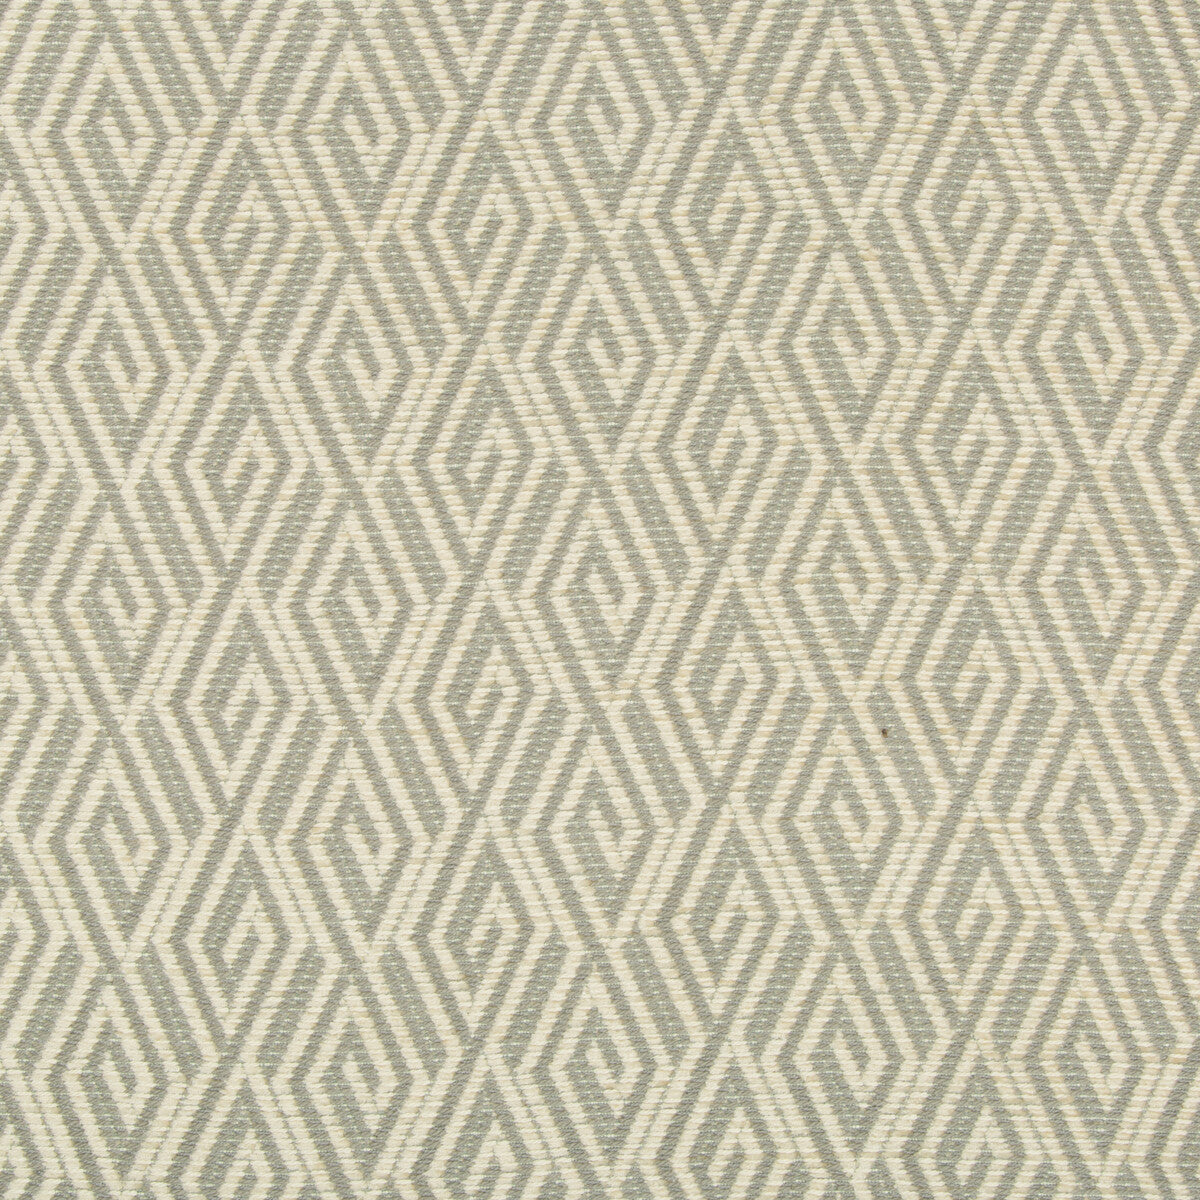 Kravet Contract fabric in 35044-11 color - pattern 35044.11.0 - by Kravet Contract in the Incase Crypton Gis collection